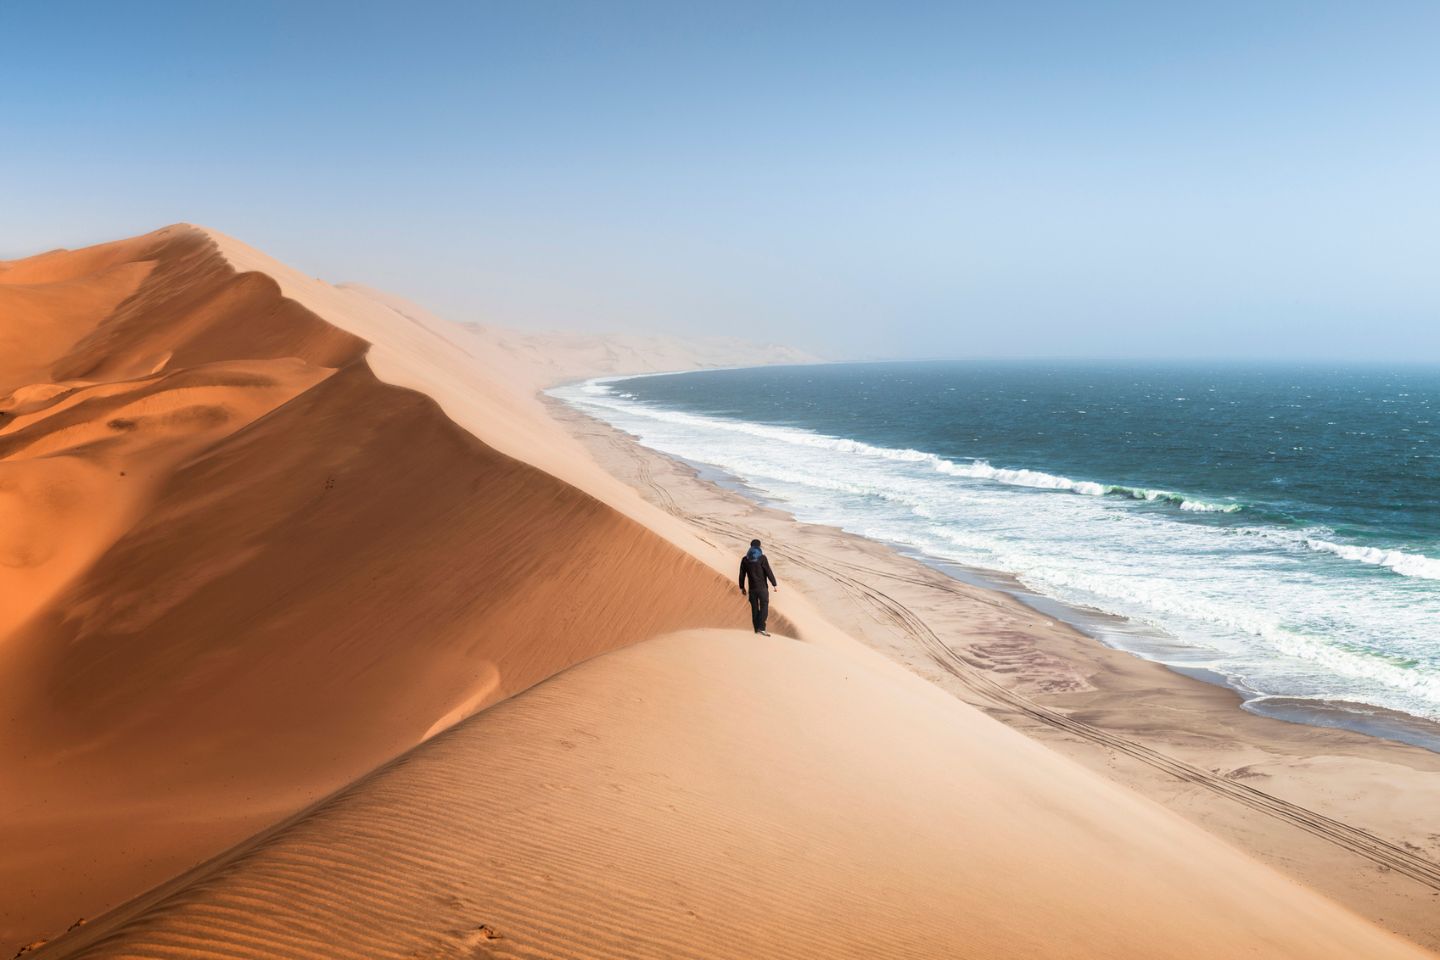 Namibia's Extreme Adventures: Sandboarding the Dunes and Skydiving Over the Skeleton Coast